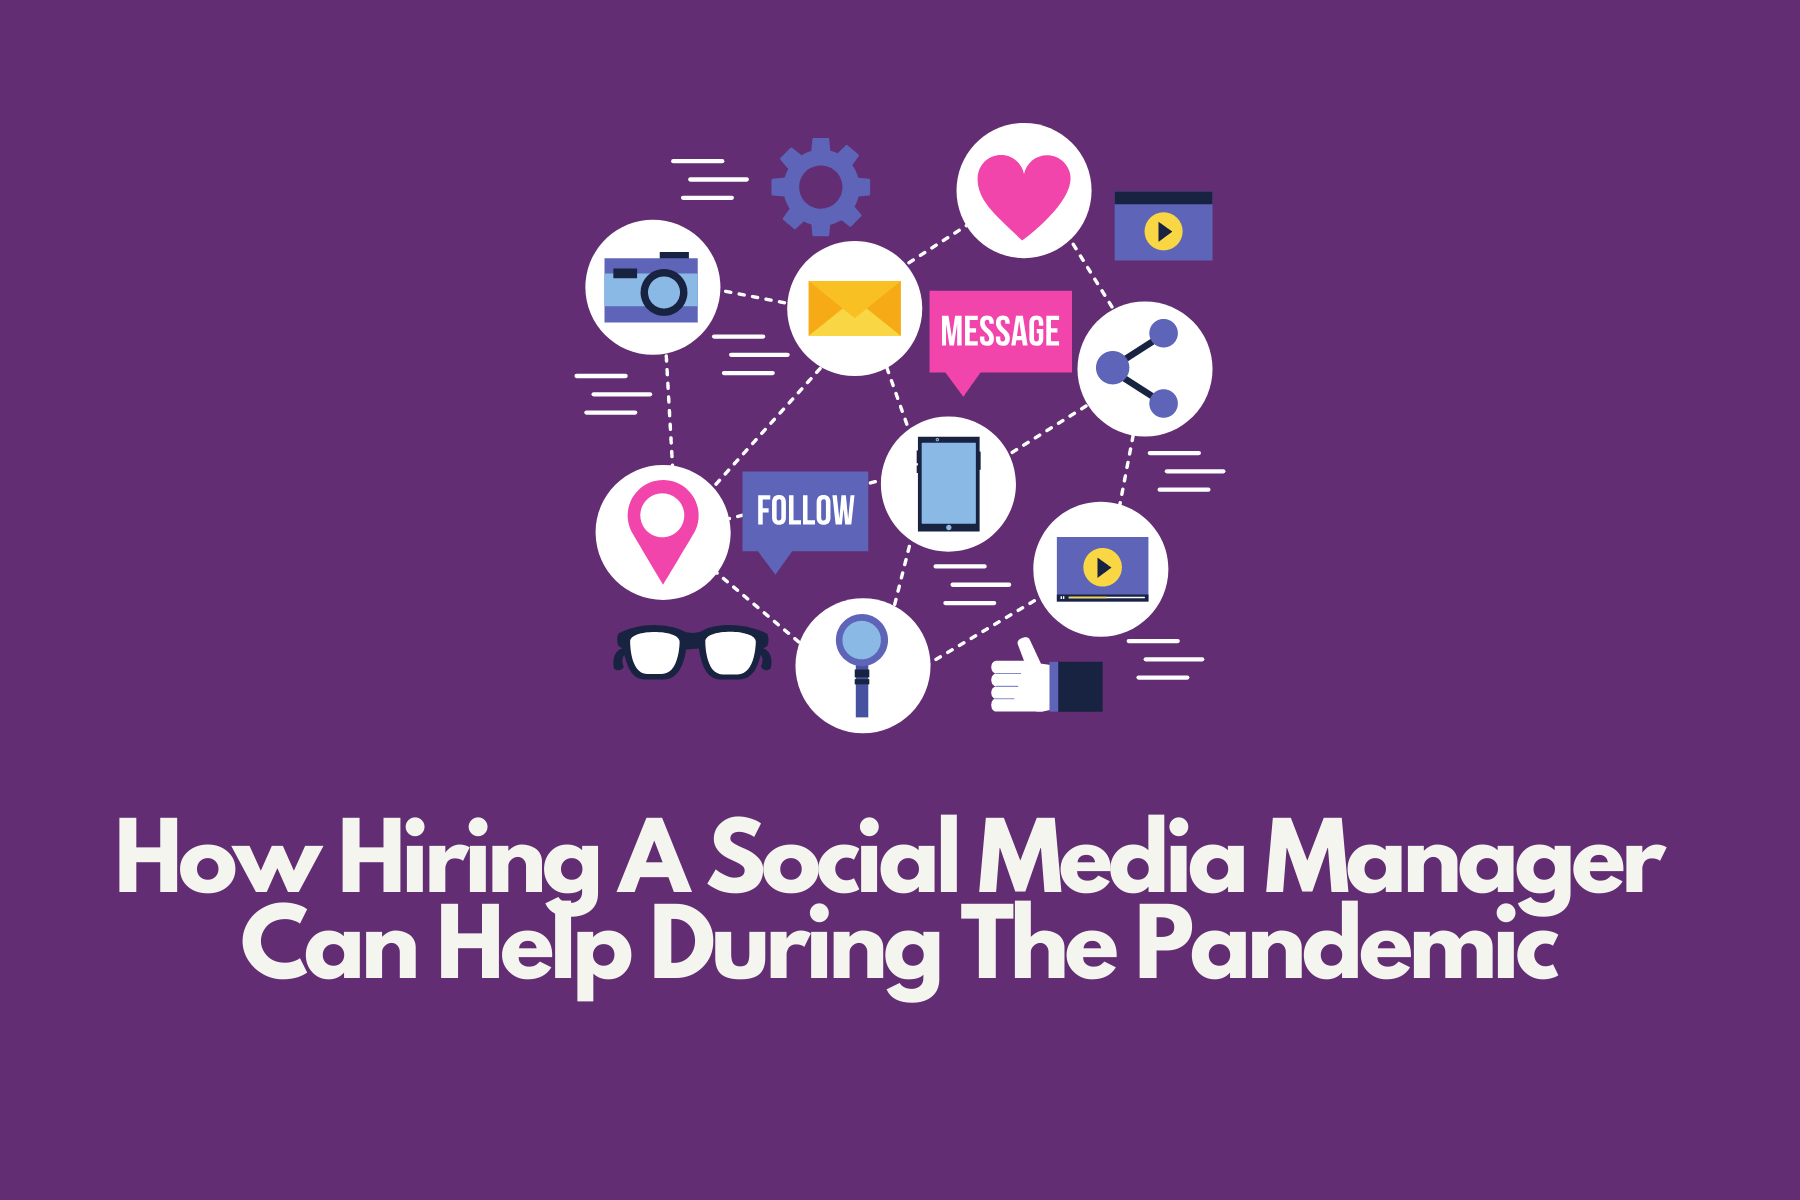 How Hiring A Social Media Manager Can Help During The Pandemic